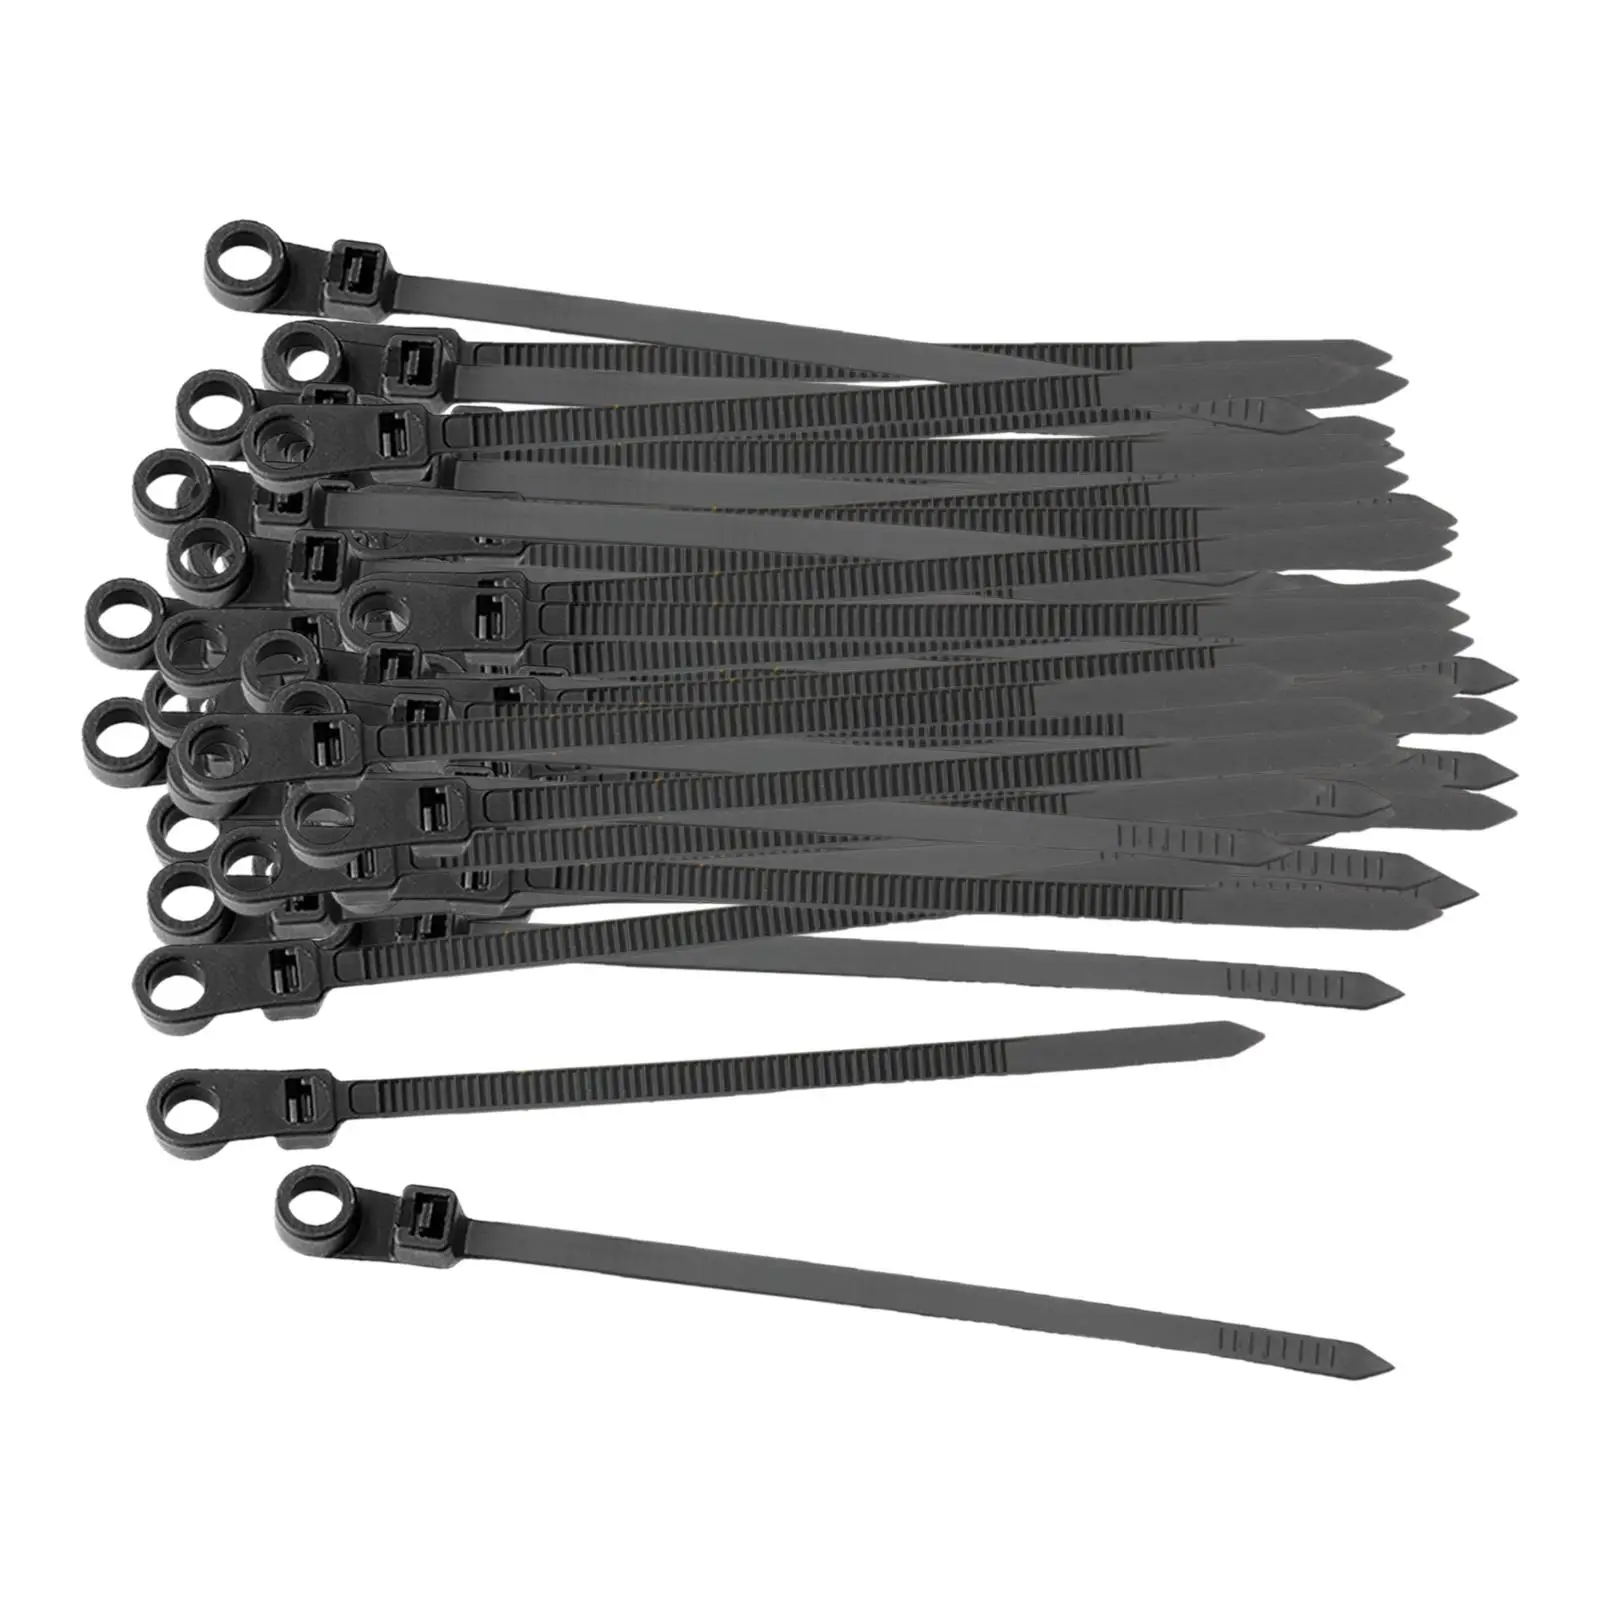 100Pcs Nylon Cable Ties with Fixed Holes Sturdy Self Locking Tie Wraps for Home Indoor Outdoor Garden Trellis Garage